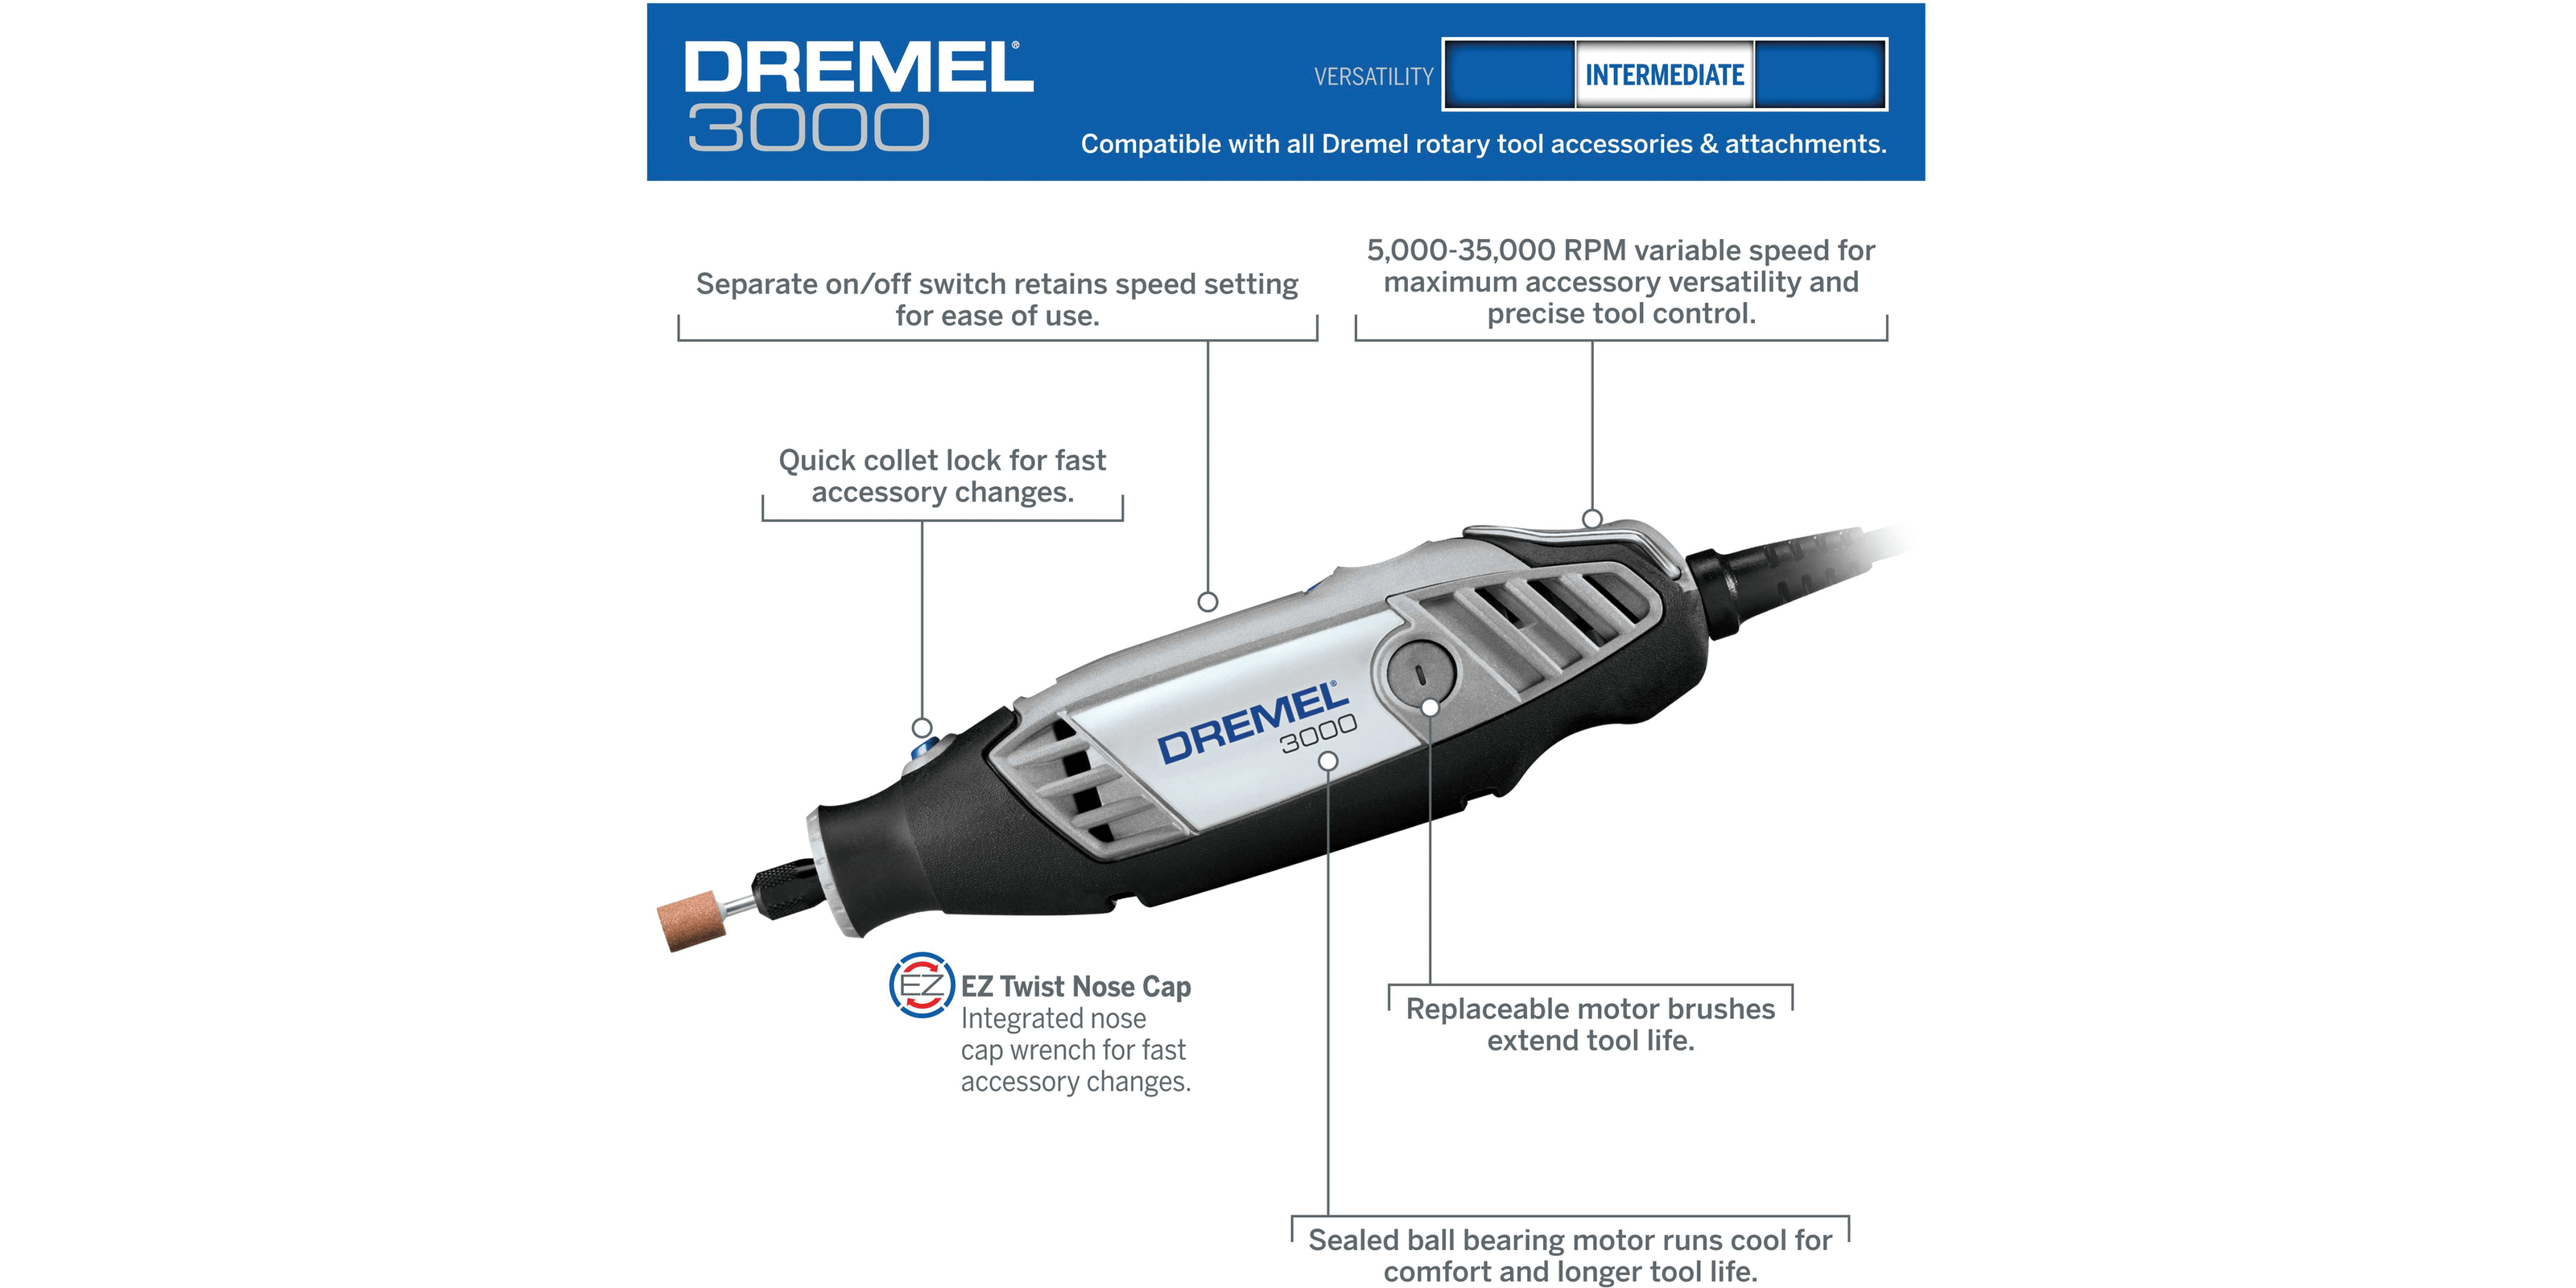 Dremel accessory chart and code as to what each is used for.